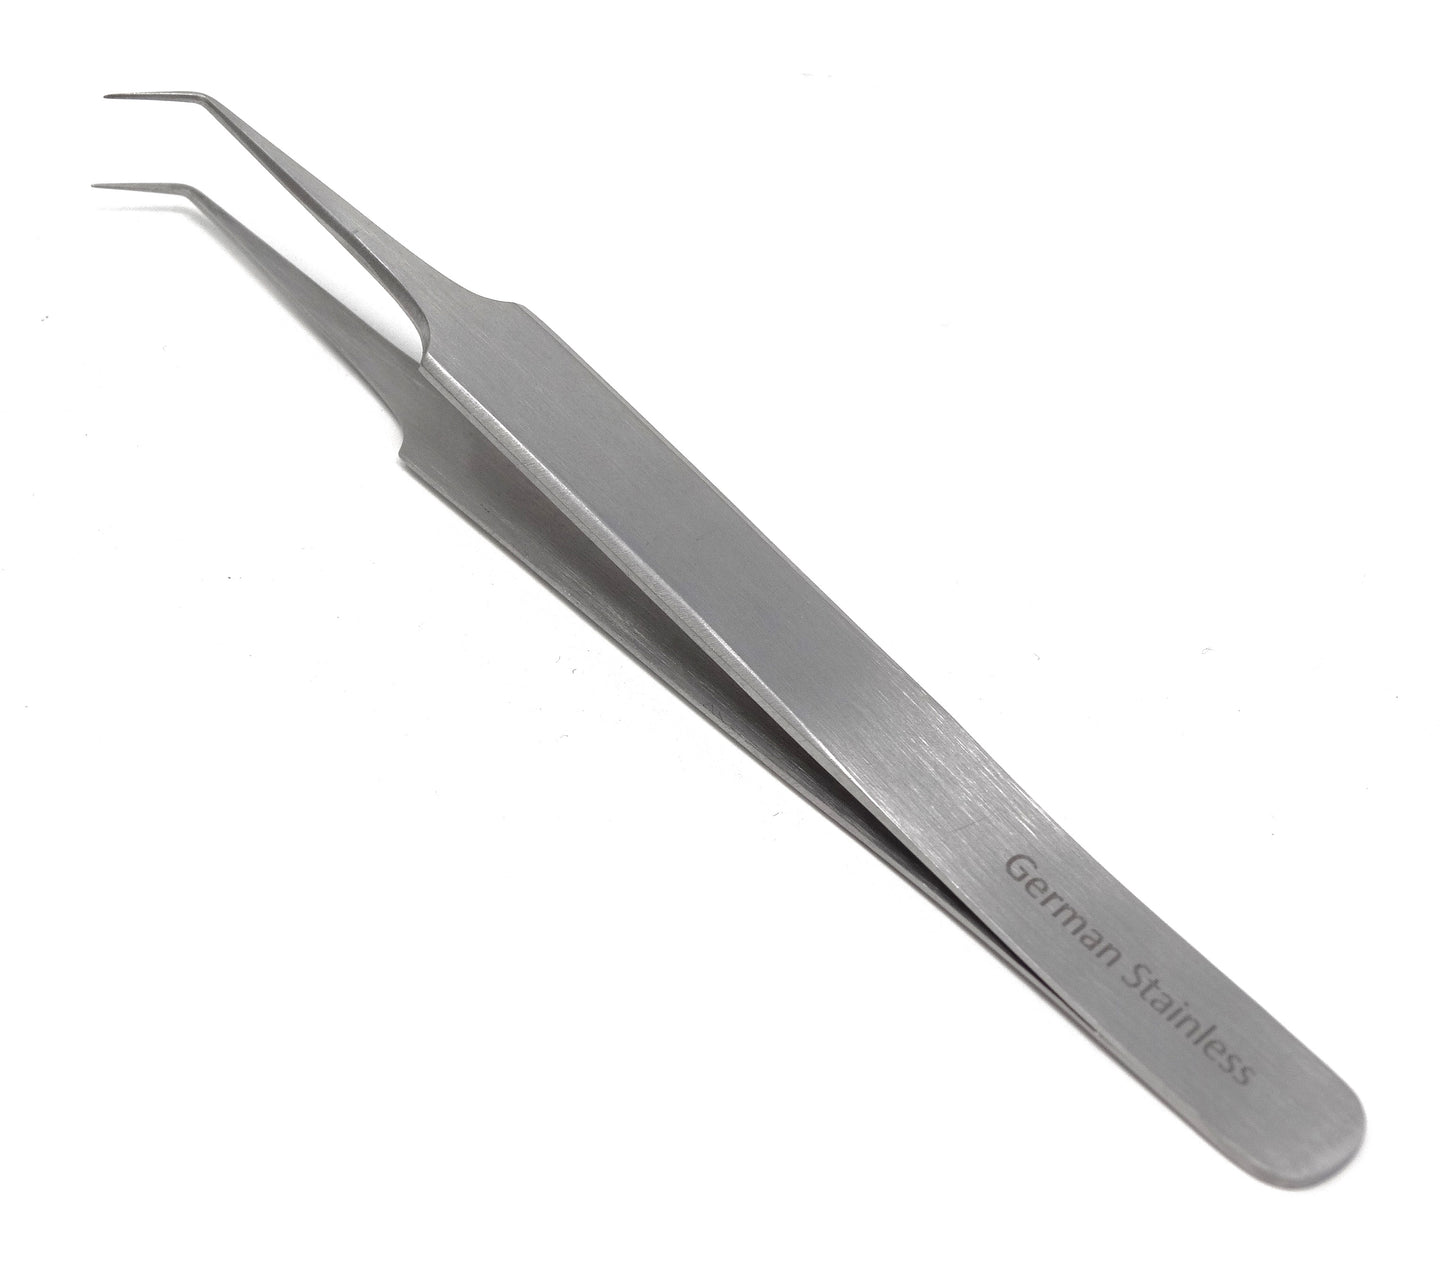 Stainless Steel Micro Surgical Forceps Tweezers A Type Angled, Fine Point, Premium Quality